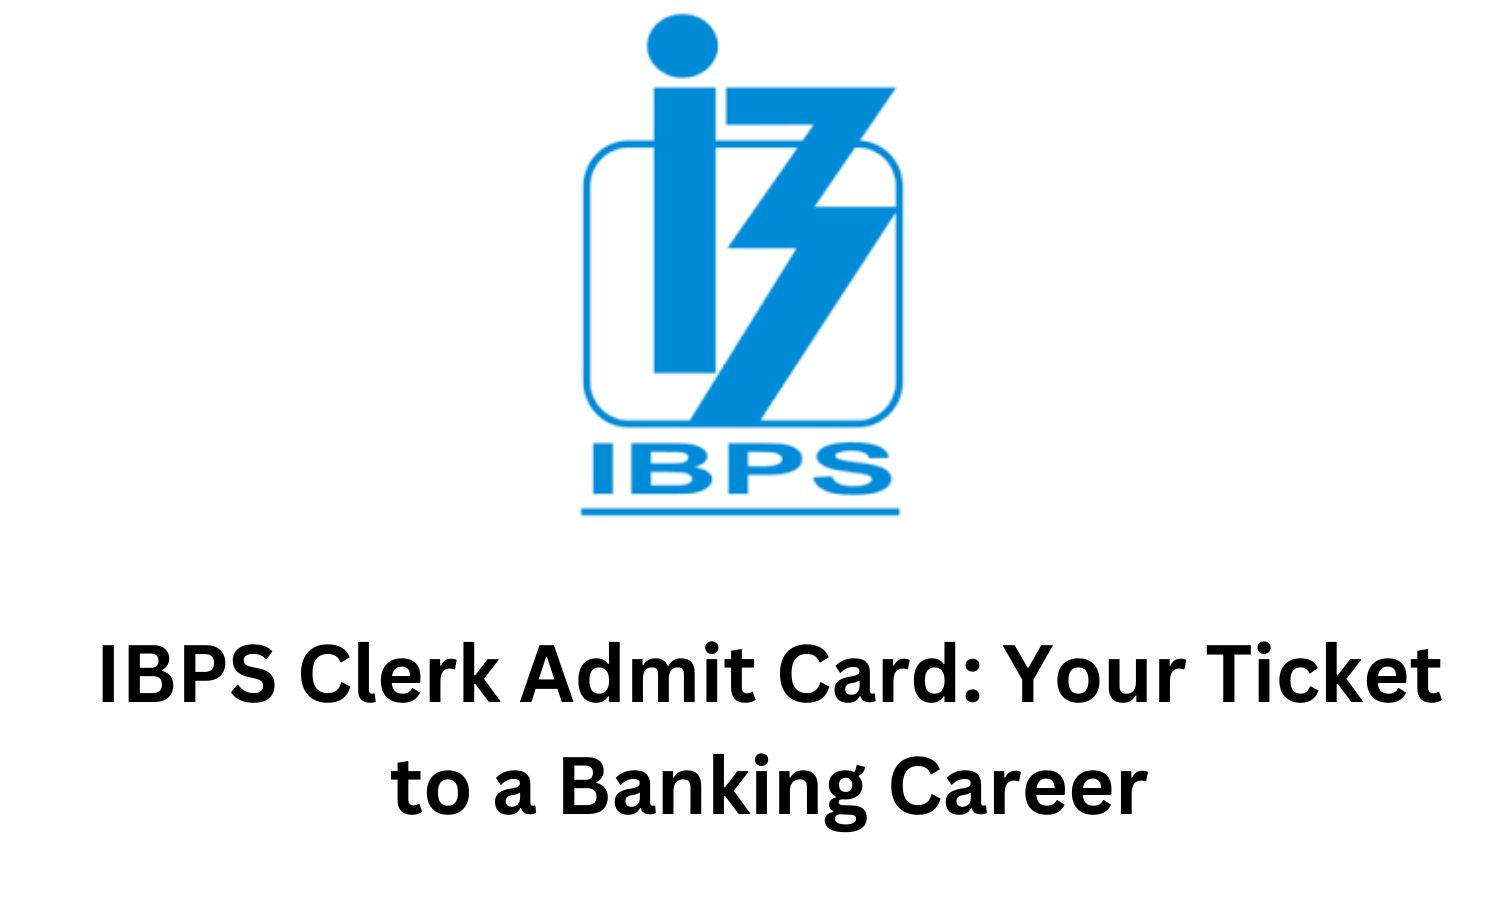 IBPS Clerk Admit Card: Your Ticket to a Banking Career